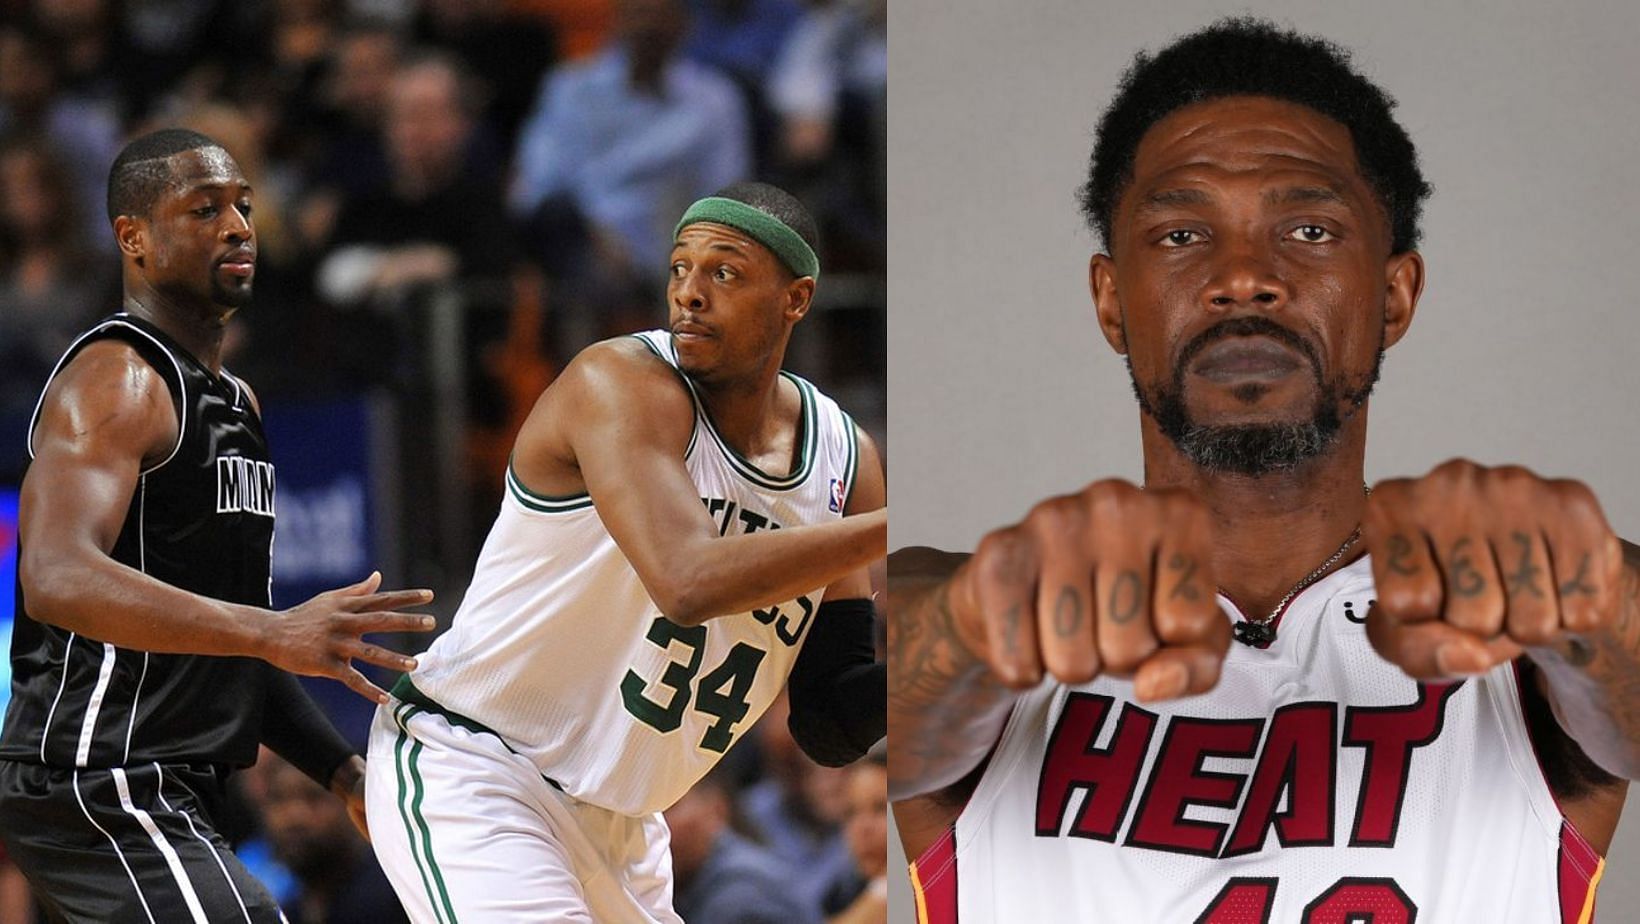 Udonis Haslem (@ud40) • Instagram photos and videos